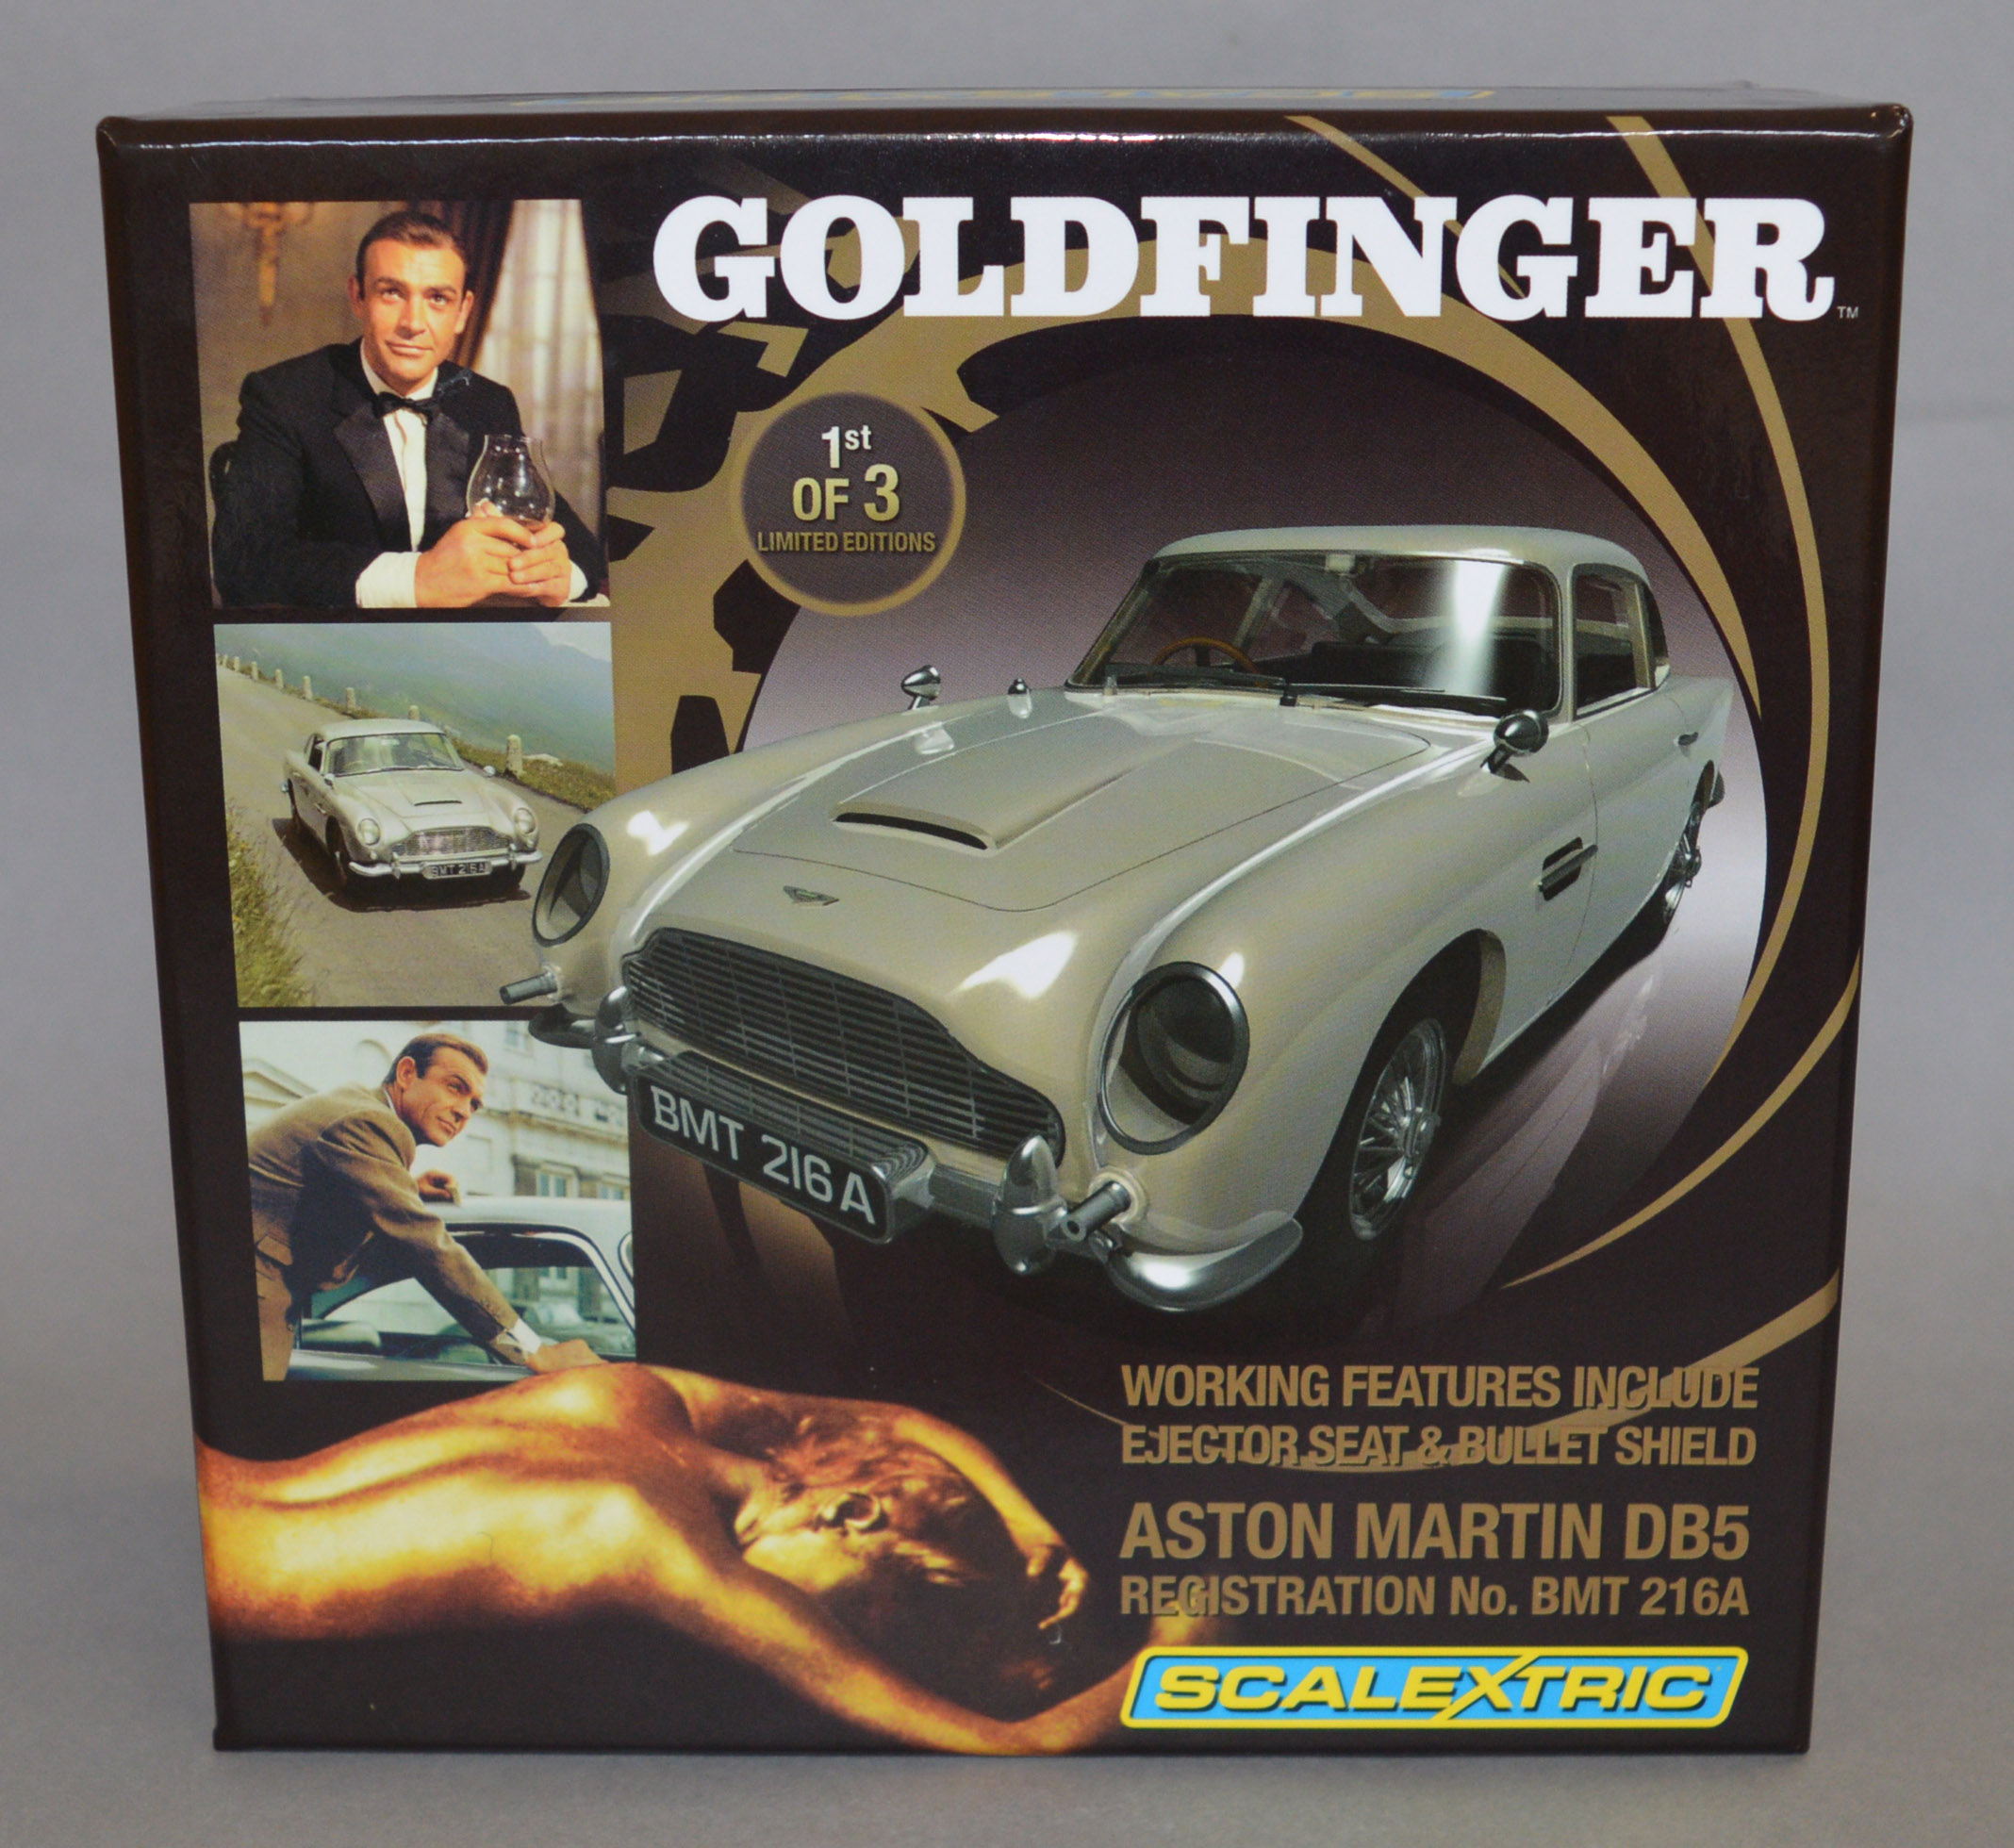 12 James Bond Scalextric diecast models, Goldfinger 007 Aston Martin DB5 contained in 1 trade box (